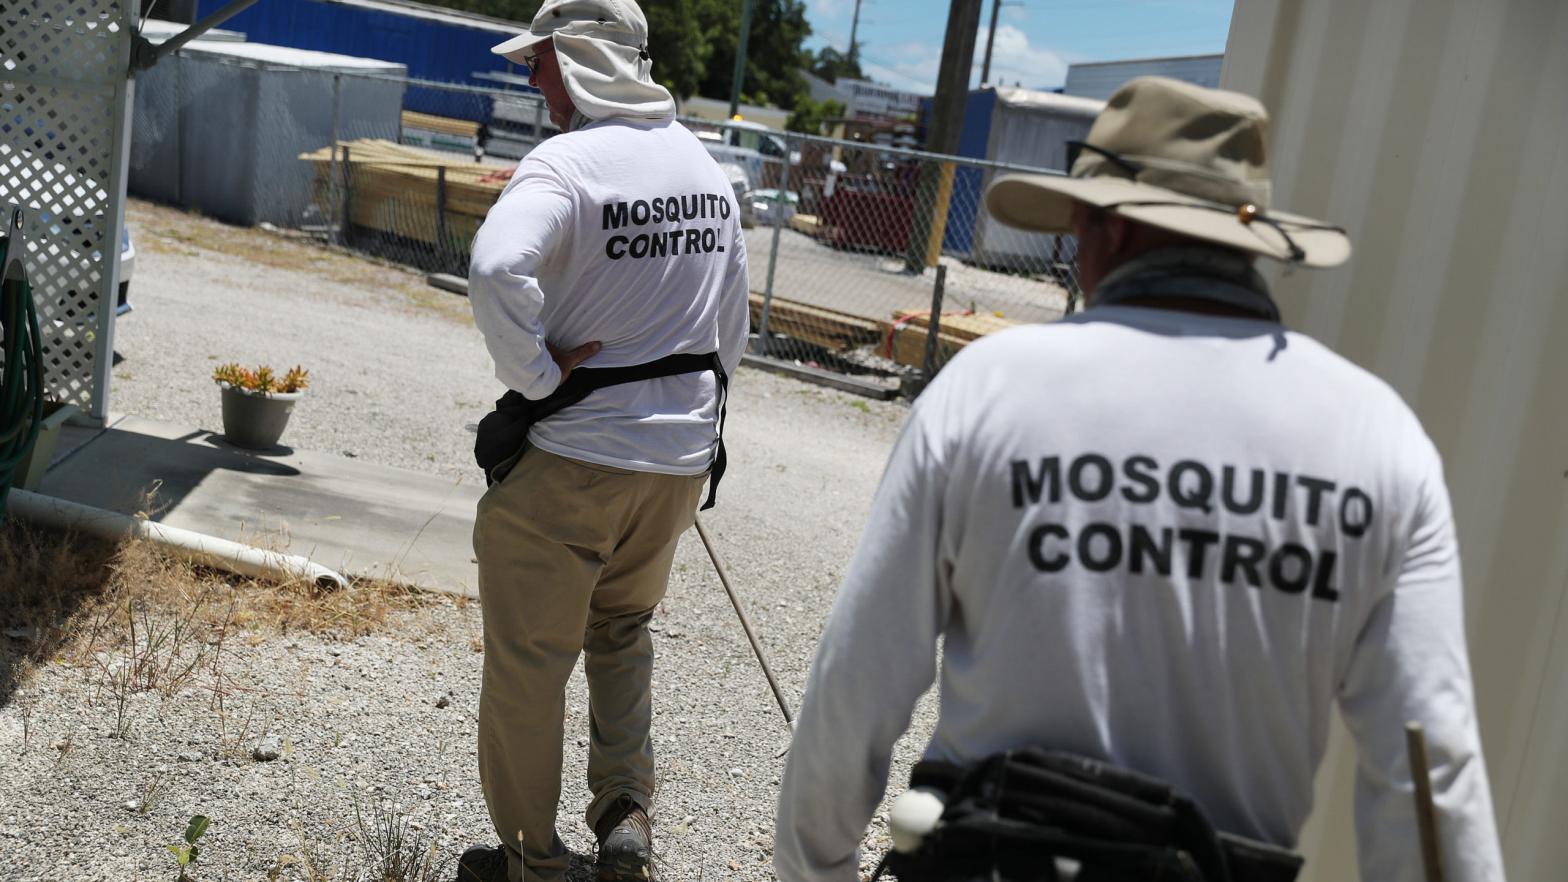 Mosquito Control in the Florida Keys. (Photo: Joe Raedle, Getty Images)